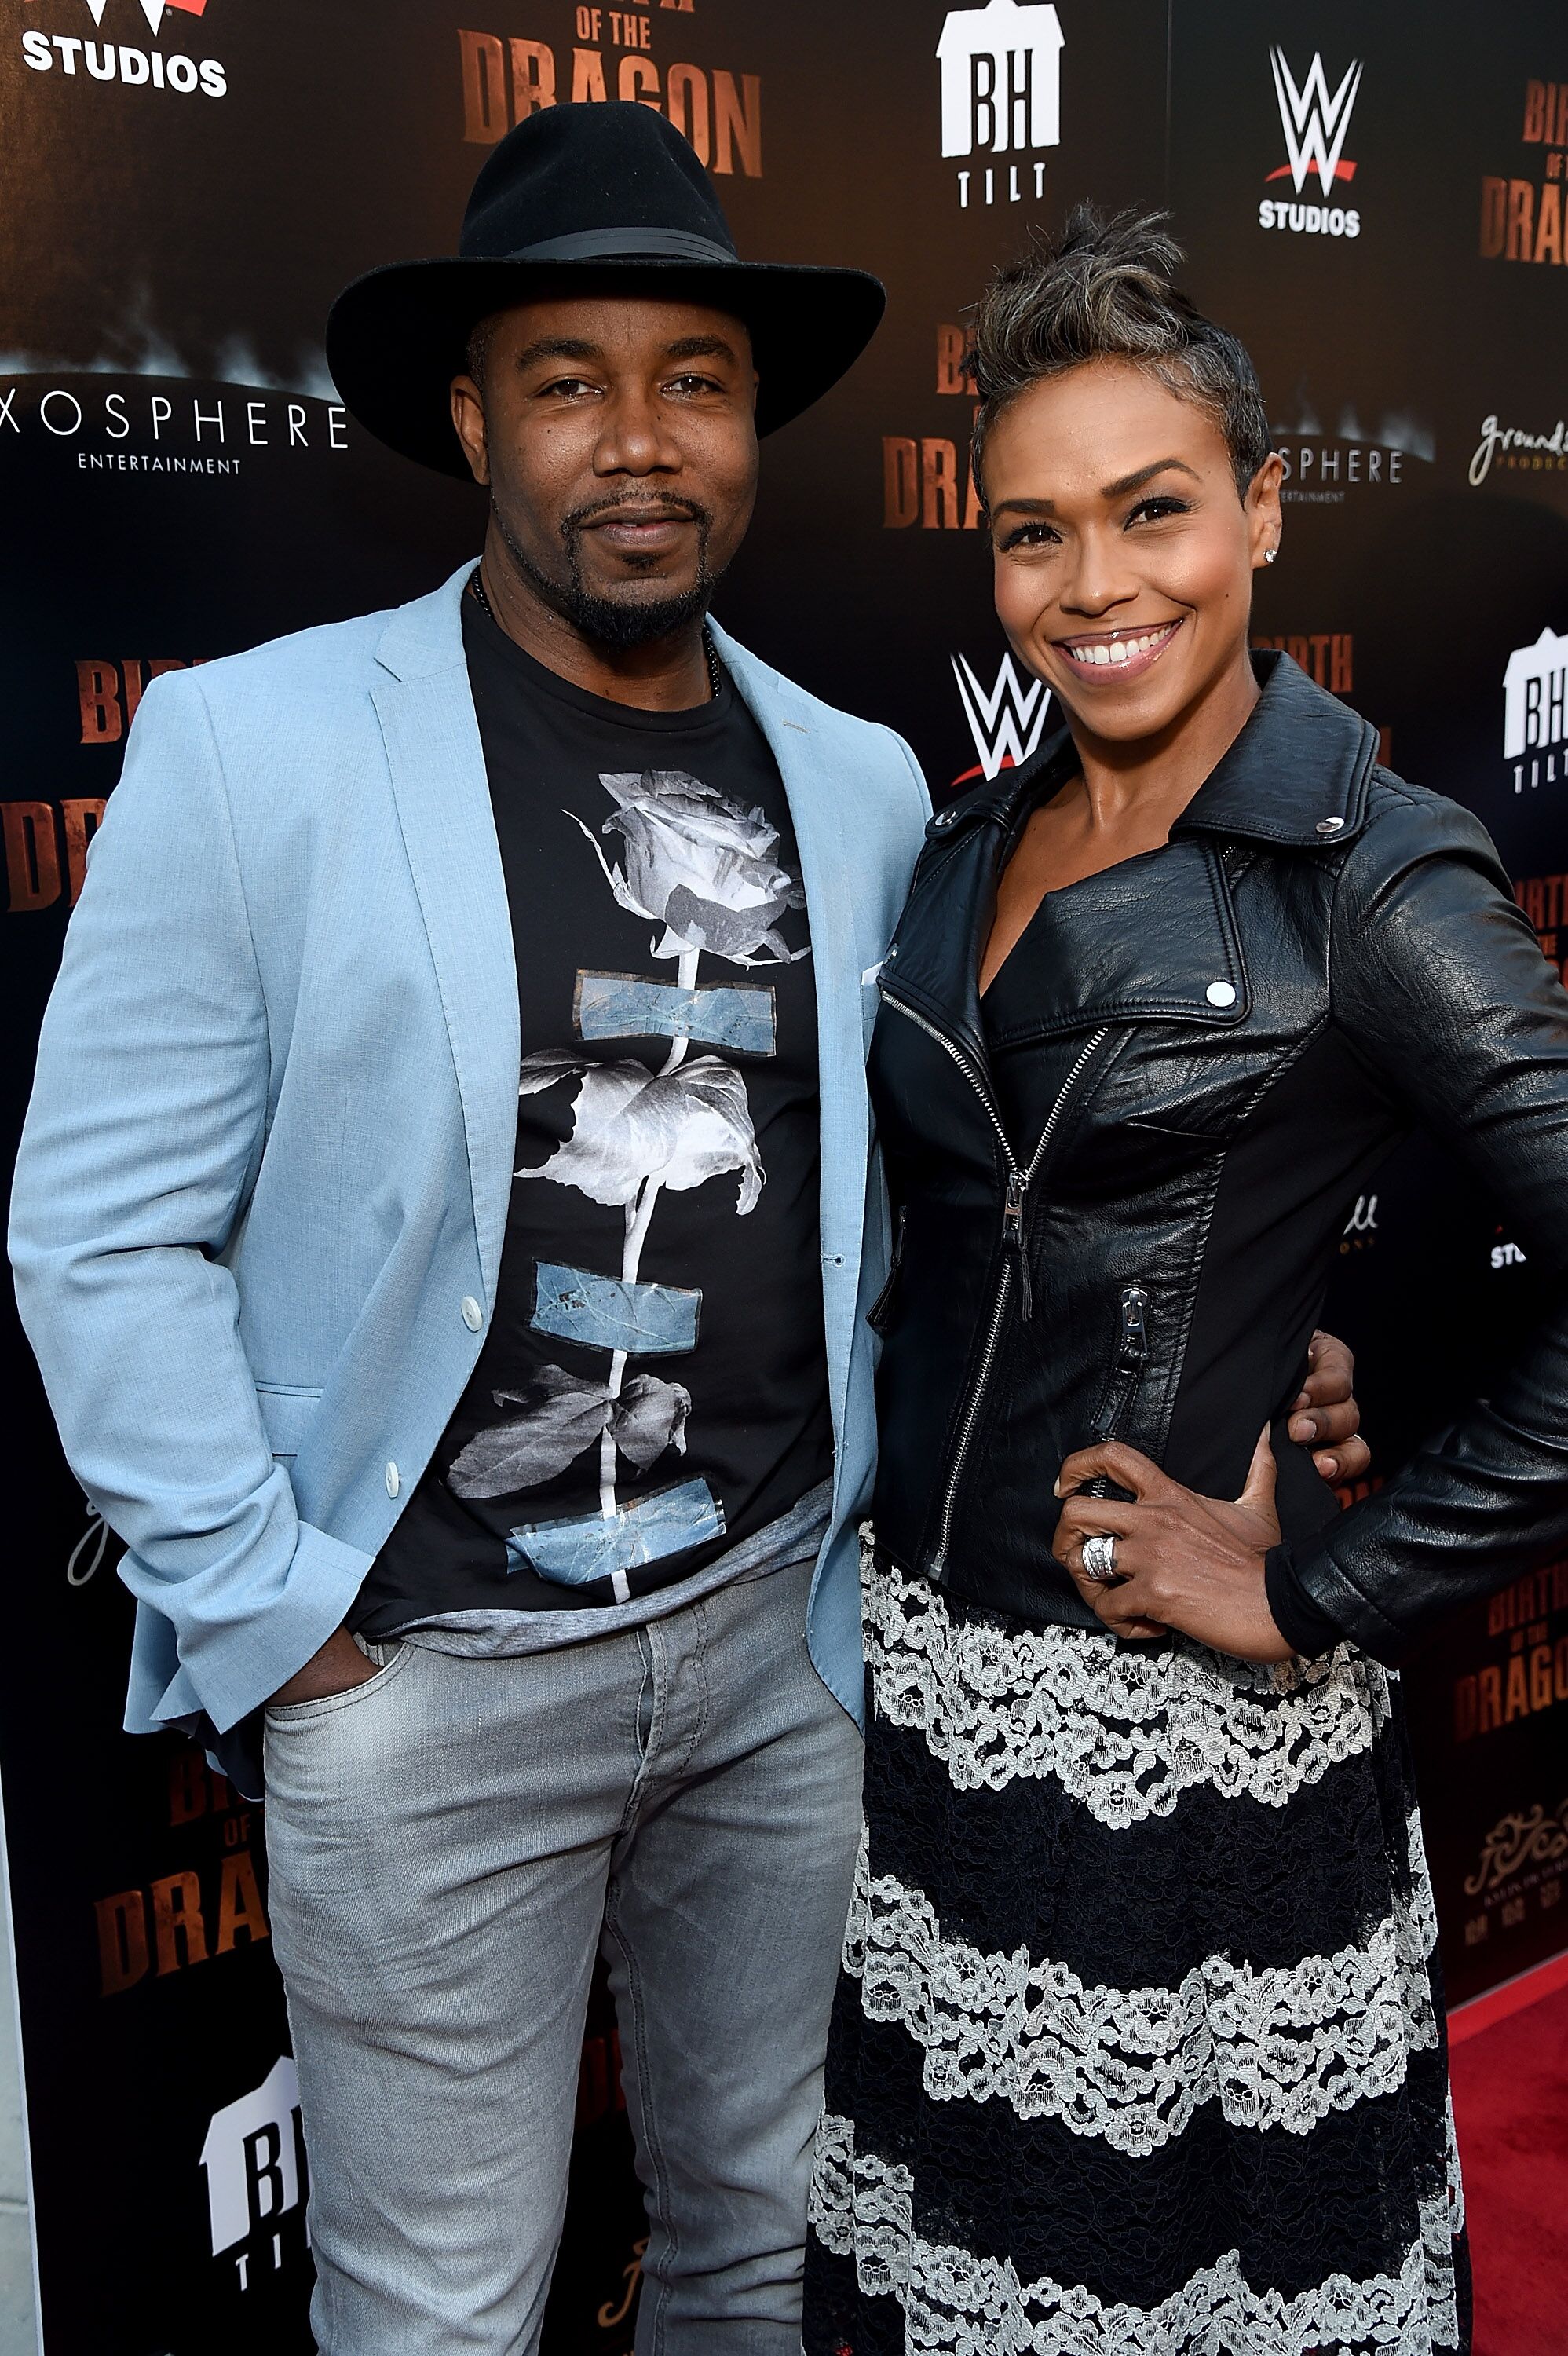 Michael Jai White with his wife Gillian Iliana Waters on August 17, 2017 in Hollywood, California | Photo: Getty Images